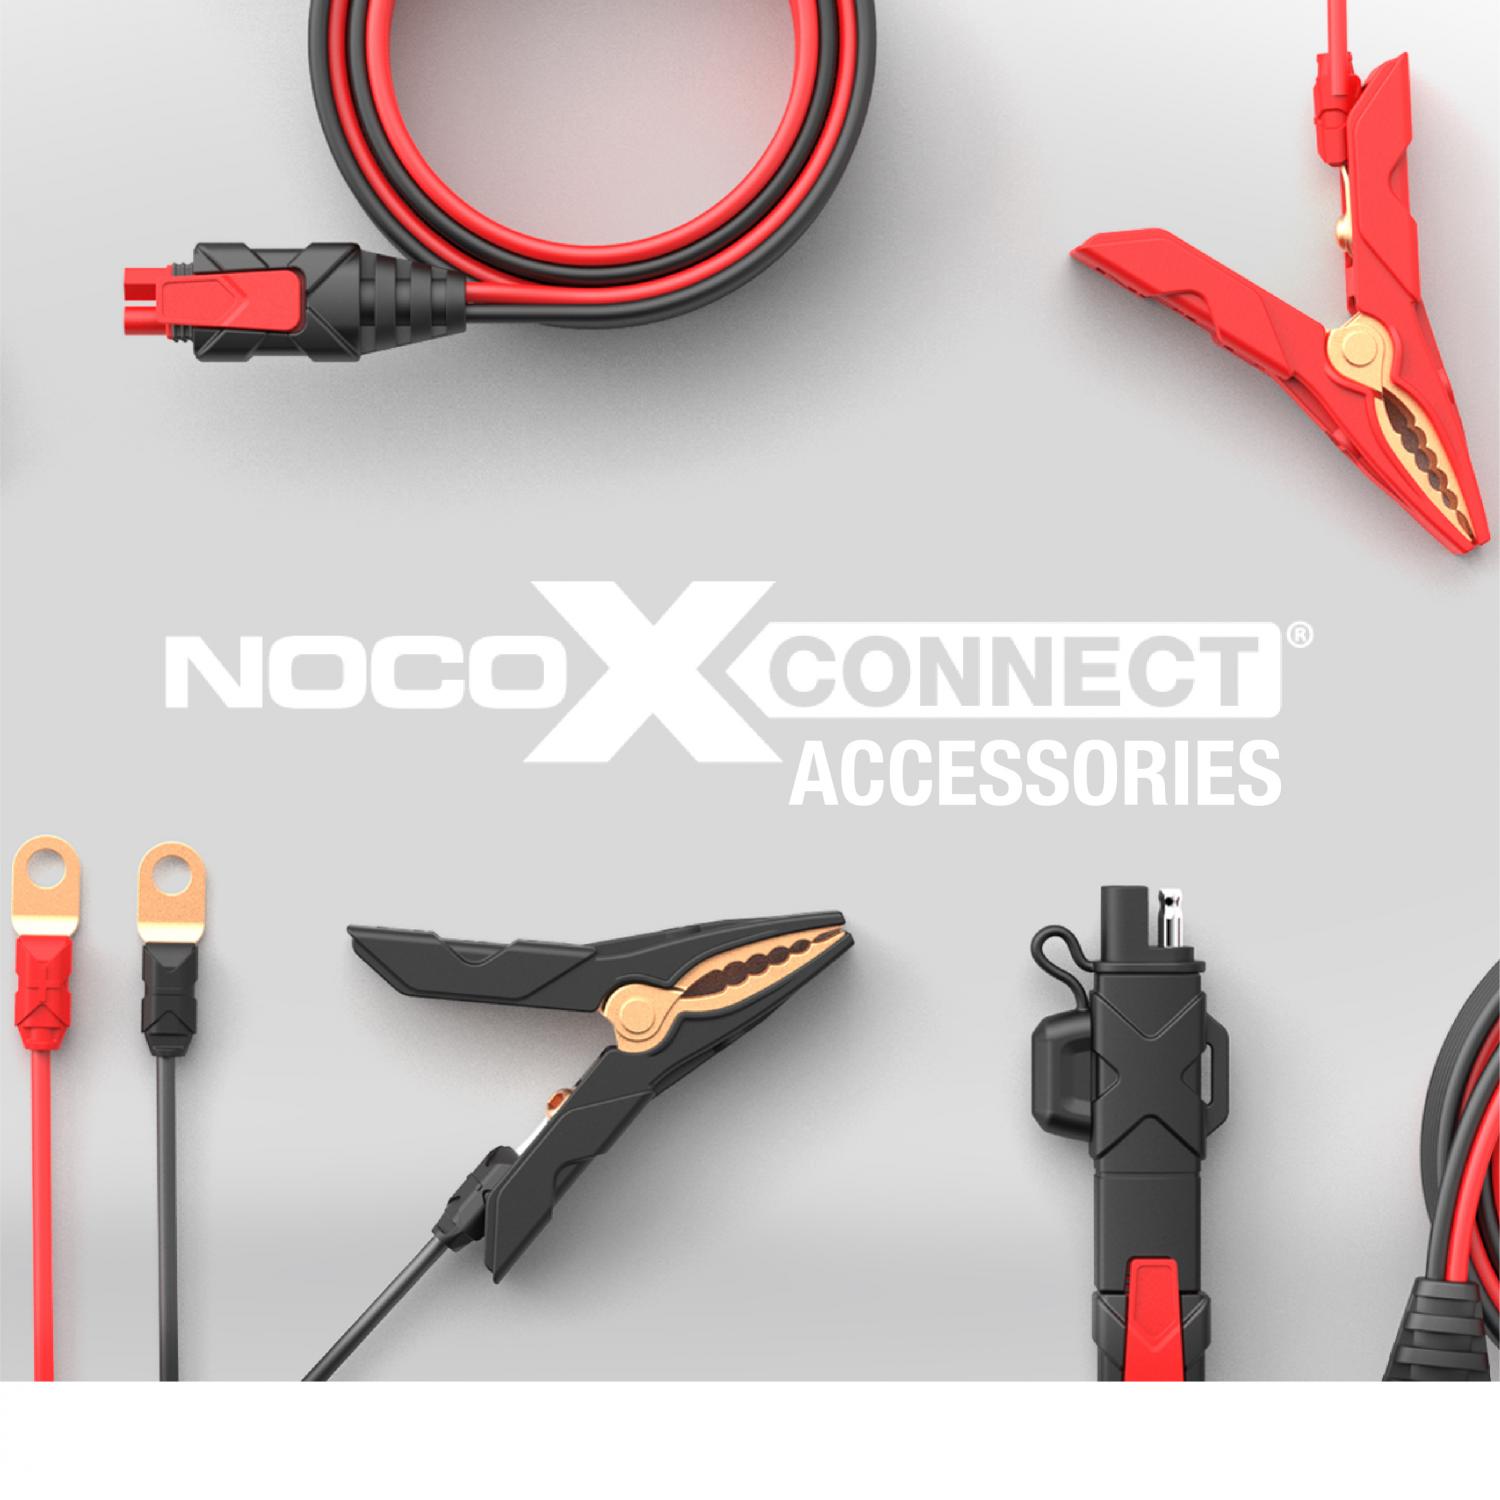 NOCO Boost Eyelet Cable w/X-Connect Adapter – I&M Electric